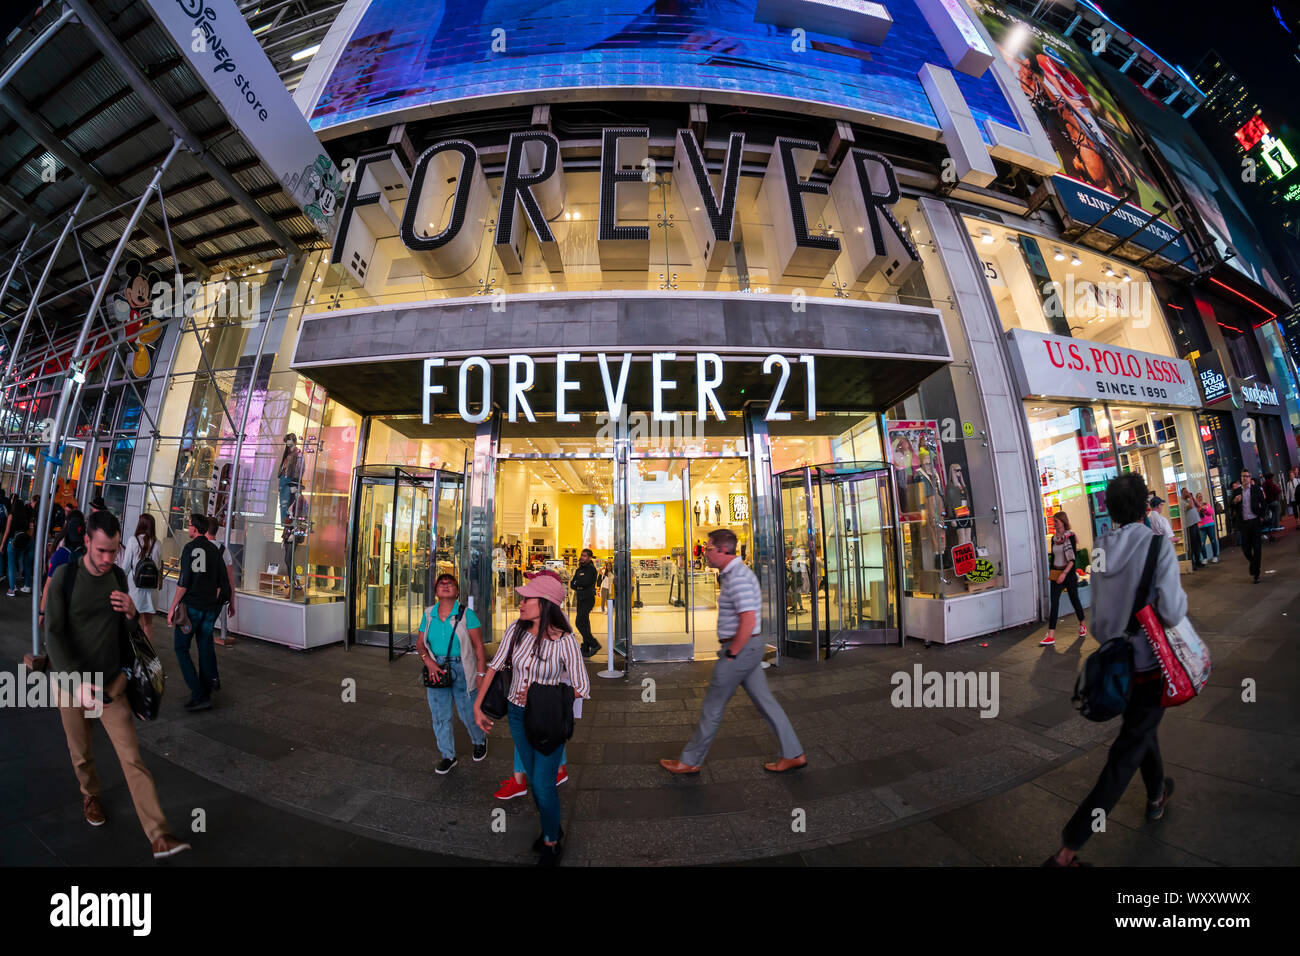 The Forever 21 store in Times Square in New York on Thursday, August 1,  2019. Forever 21 is reported to be facing financial difficulties and is  developing plans to restructure to avoid